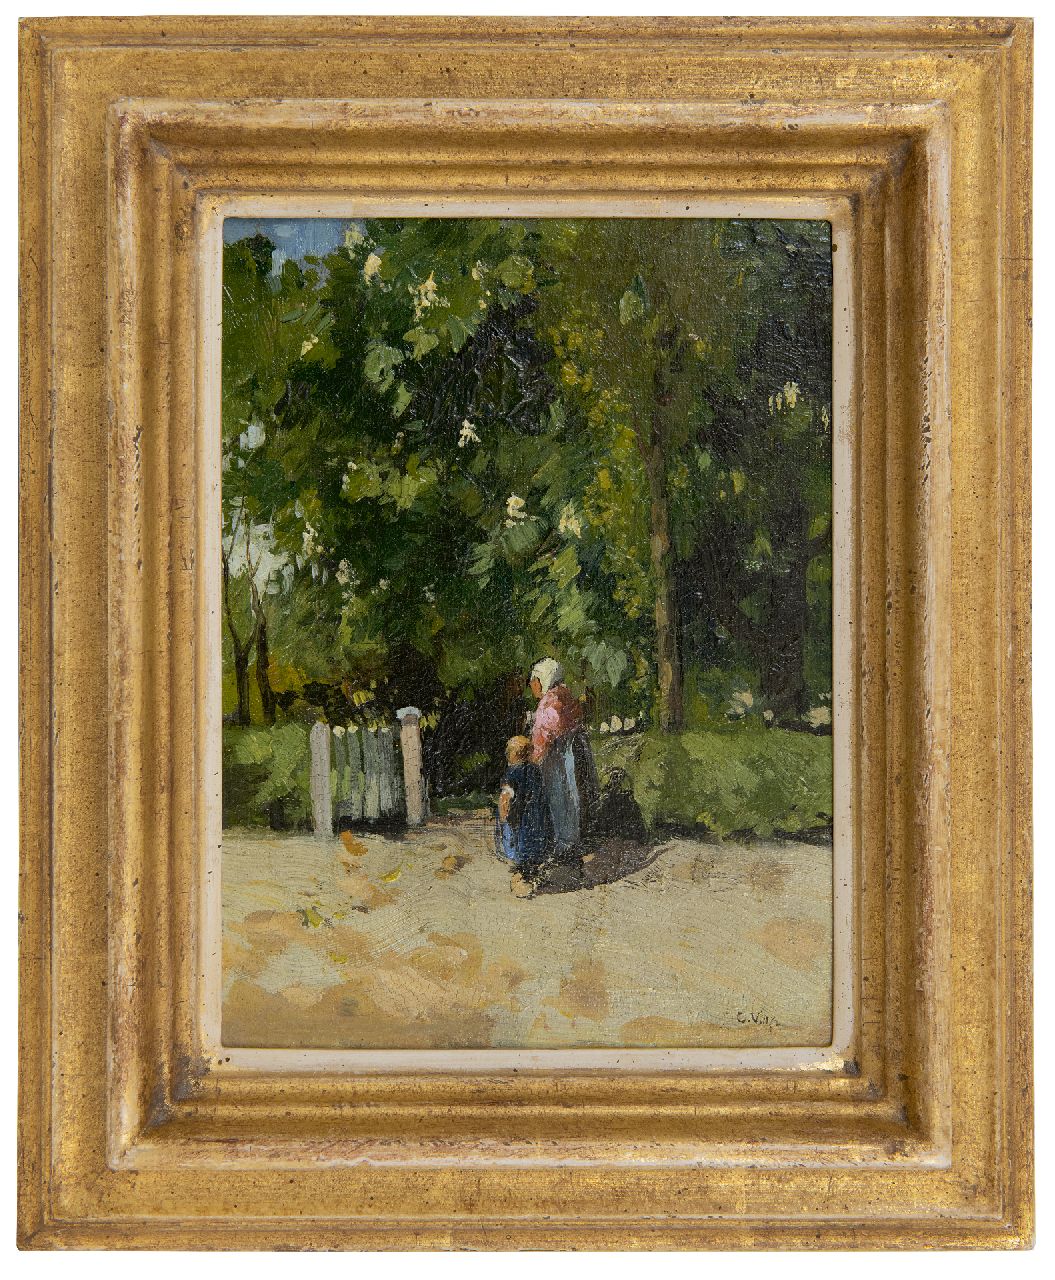 Vreedenburgh C.  | Cornelis Vreedenburgh | Paintings offered for sale | Mother and child at a garden gate, oil on canvas 21.4 x 16.2 cm, signed l.r. with initials and dated '07